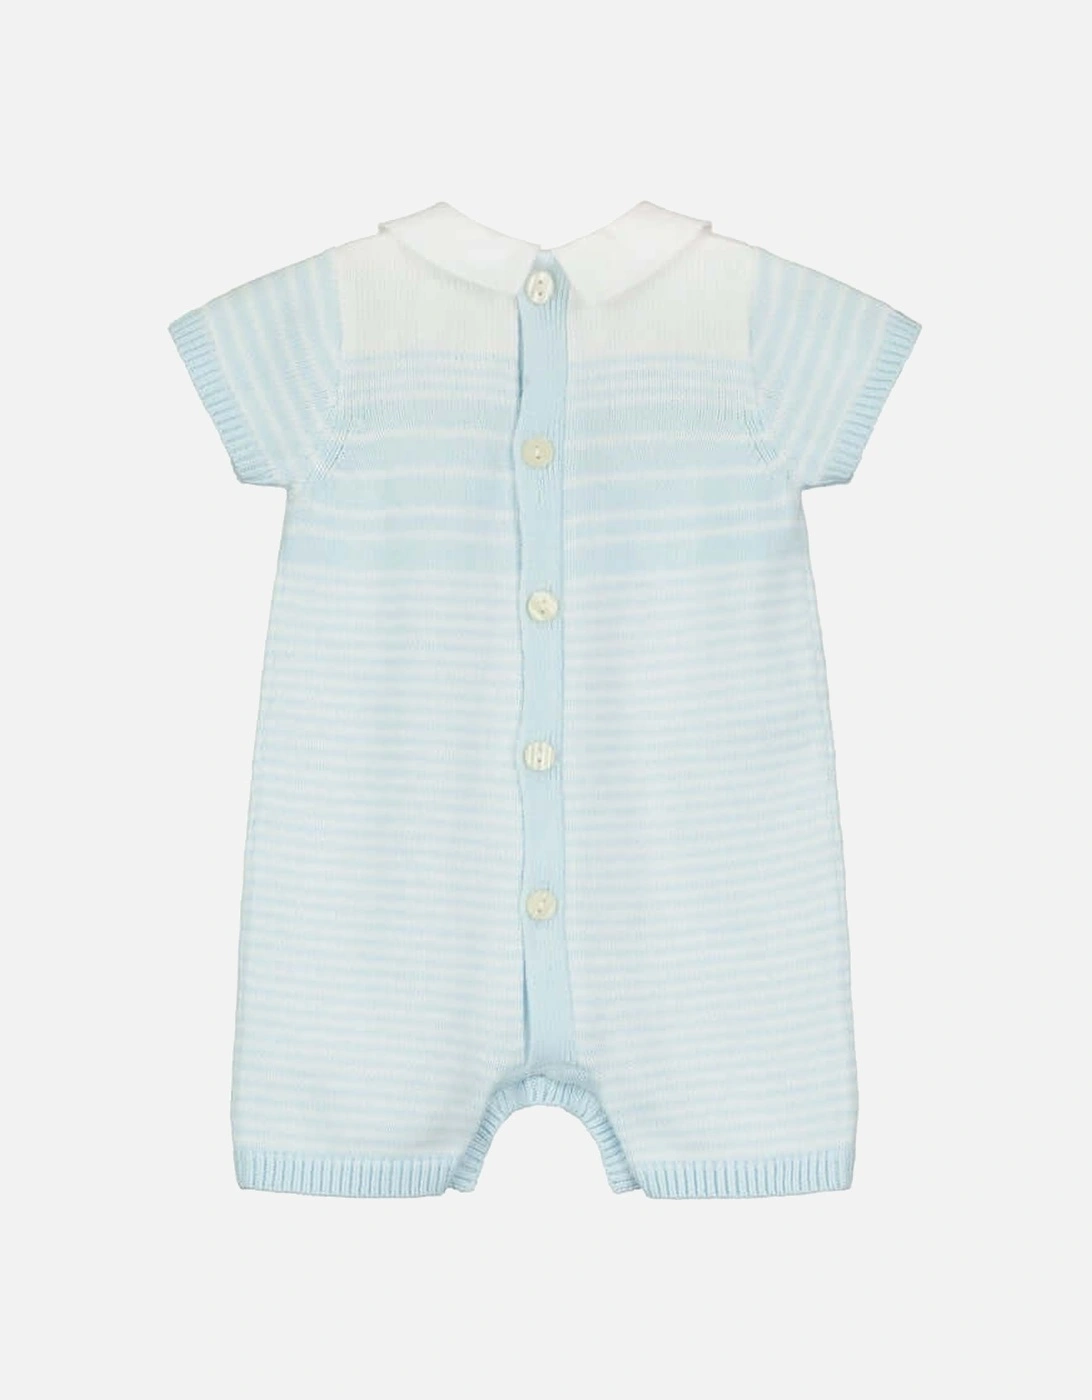 Boys Pale Blue Striped Knitted Romper